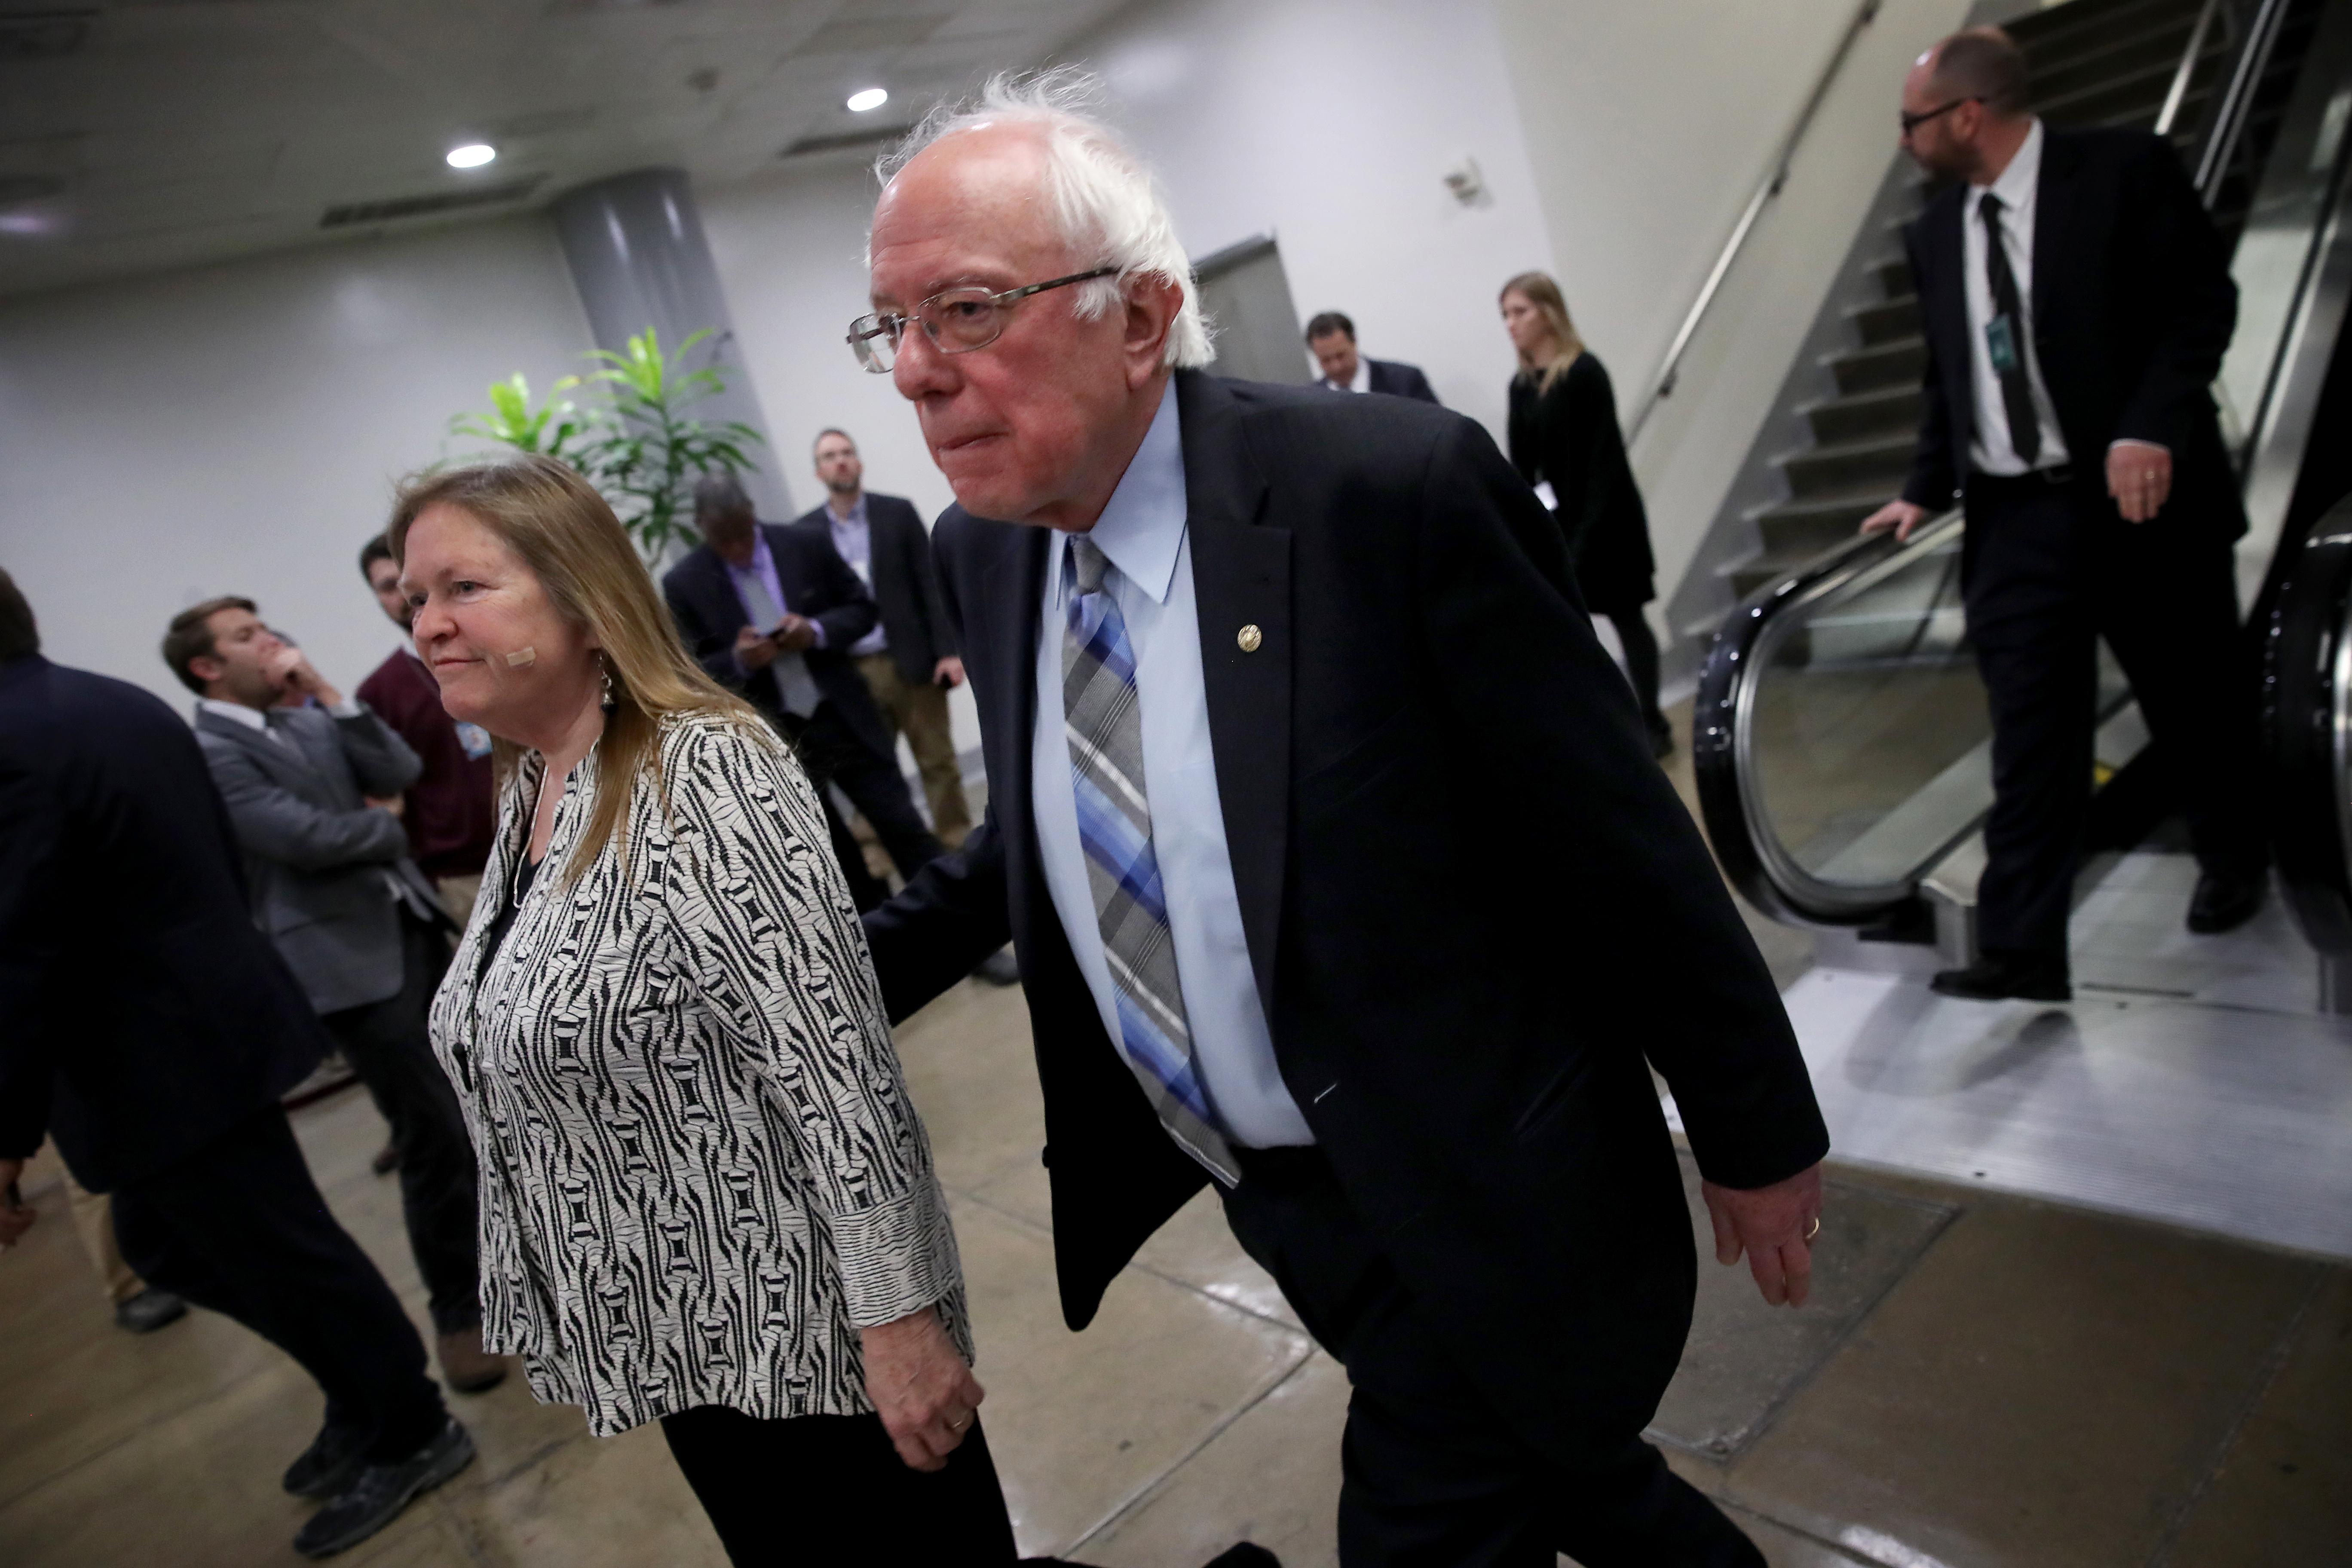 WASHINGTON, DC - JANUARY 31: Sen. Bernie Sanders (I-VT) walks with his wife Jane after leaving the Senate floor for a vote on legislation advancing Senate Majority Leader Mitch McConnell's plan voicing opposition to U.S. President Donald Trump's intention of withdrawing U.S. troops from Afghanistan and Syria on January 31, 2019 in Washington, DC. The Senate voted in overwhelmingly bipartisan fashion in favor of the legislation, rebuking President Trump's policy. (Photo by Win McNamee/Getty Images)